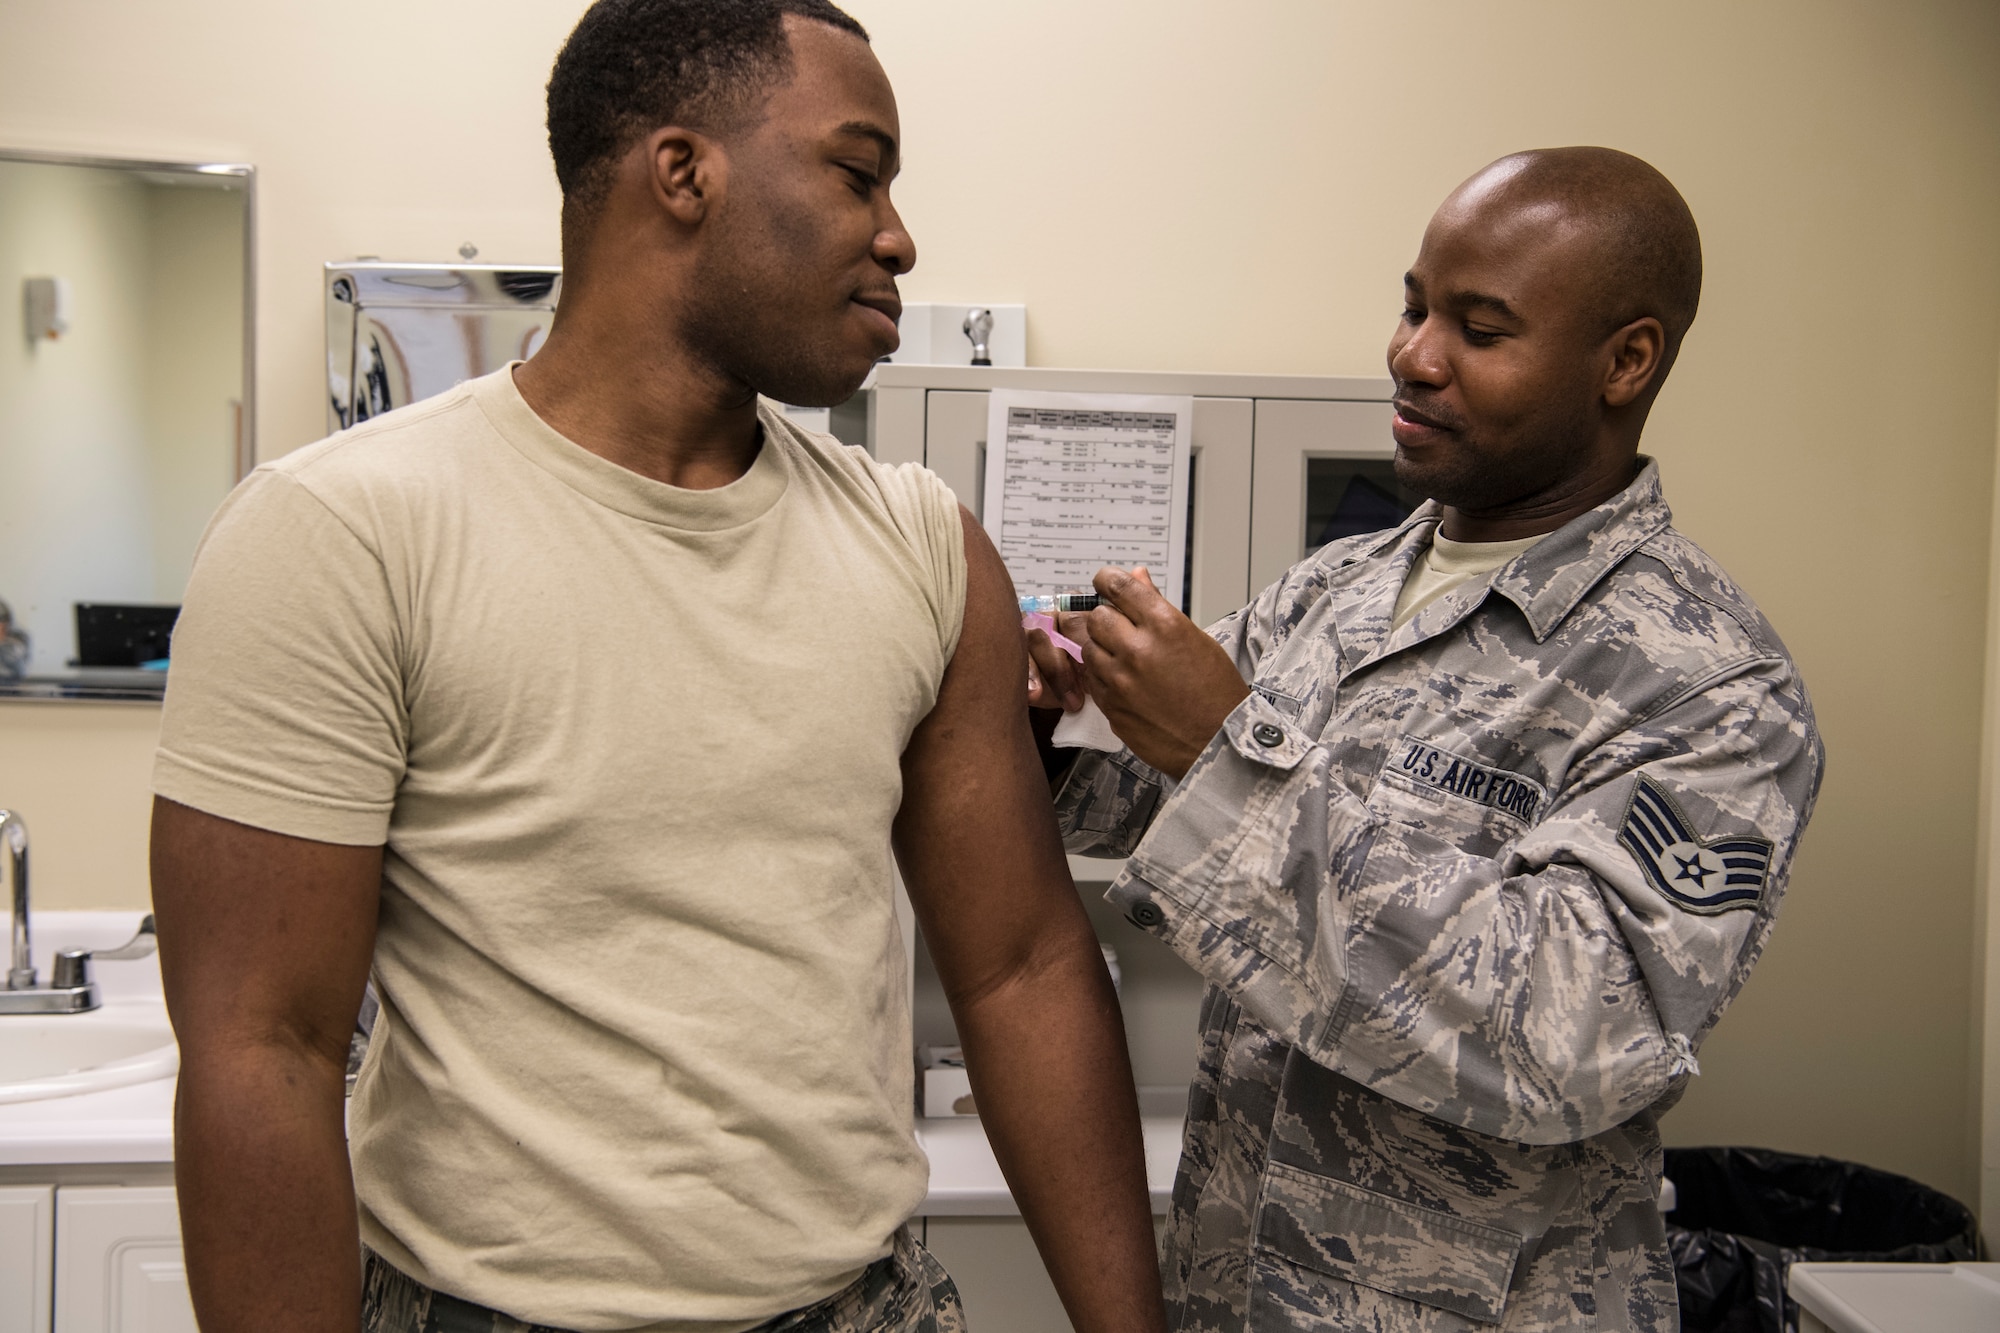 Airman 1st Cass Jonah Douglas, 434th Aerospace Medicine Squadron health services technician, receives an influenza vaccination from Staff Sgt. Lavarous Johnson, 434th AMDS medical technician, at Grissom Air Reserve Base, Ind., Oct. 23, 2018. Grissom is required to achieve a vaccination rate of 90% or higher before the end of the year. (U.S. Air Force photo / Senior Airman Harrison Withrow)